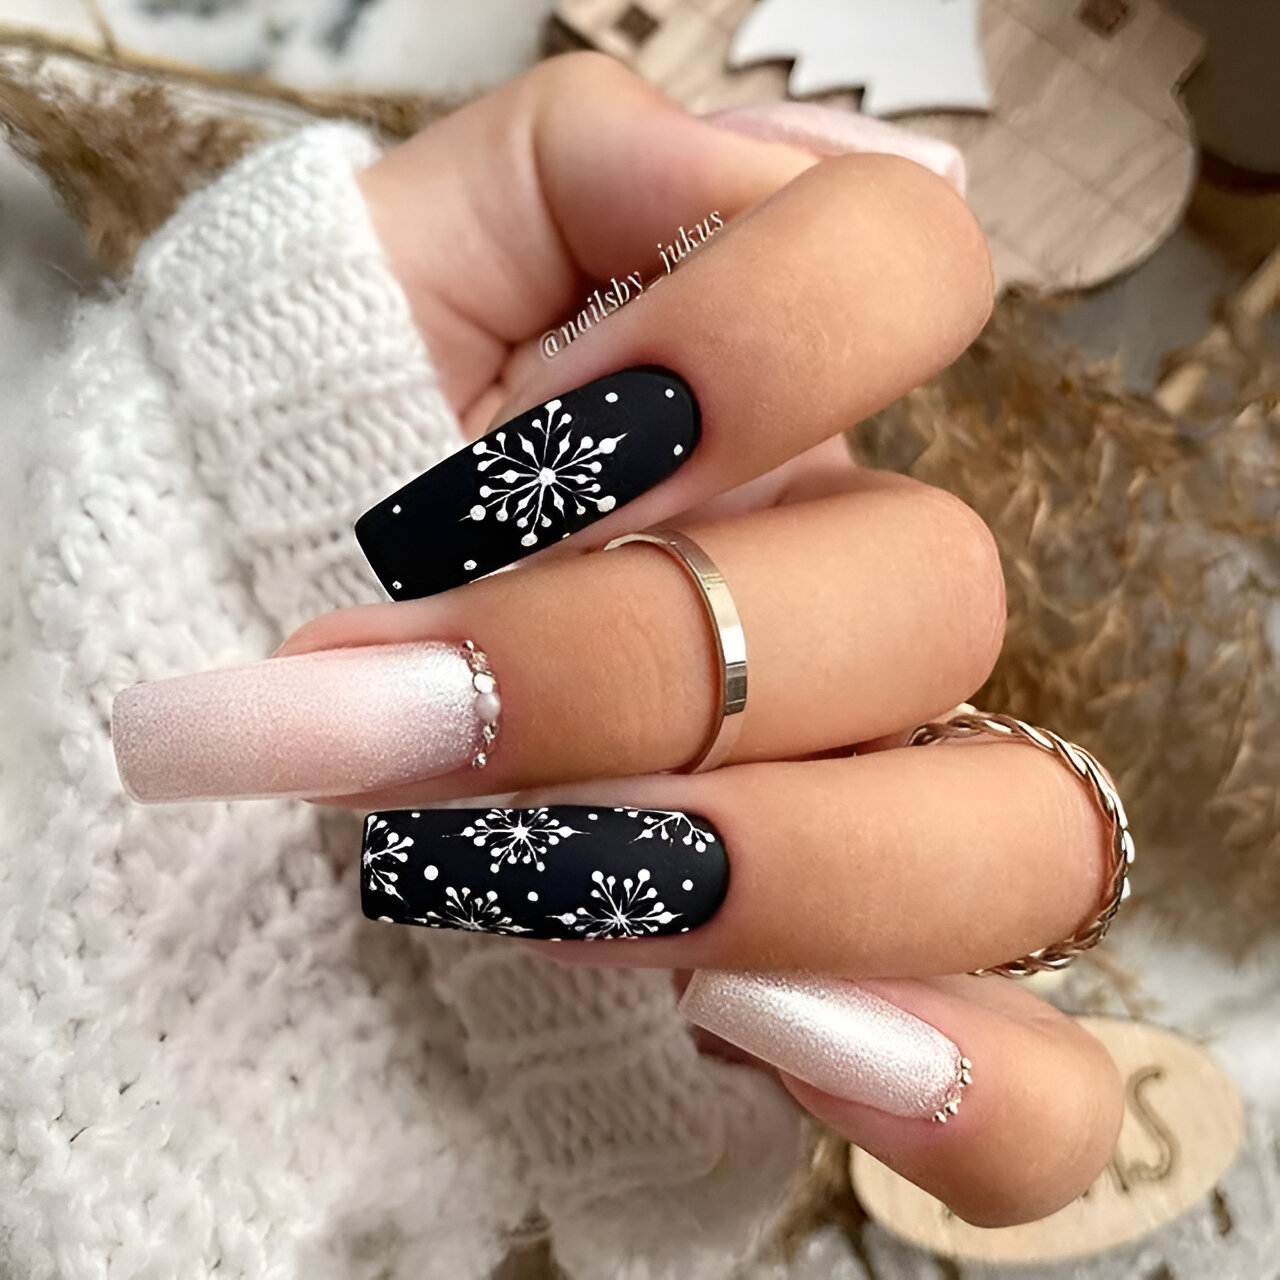 Black Nails With White Snow